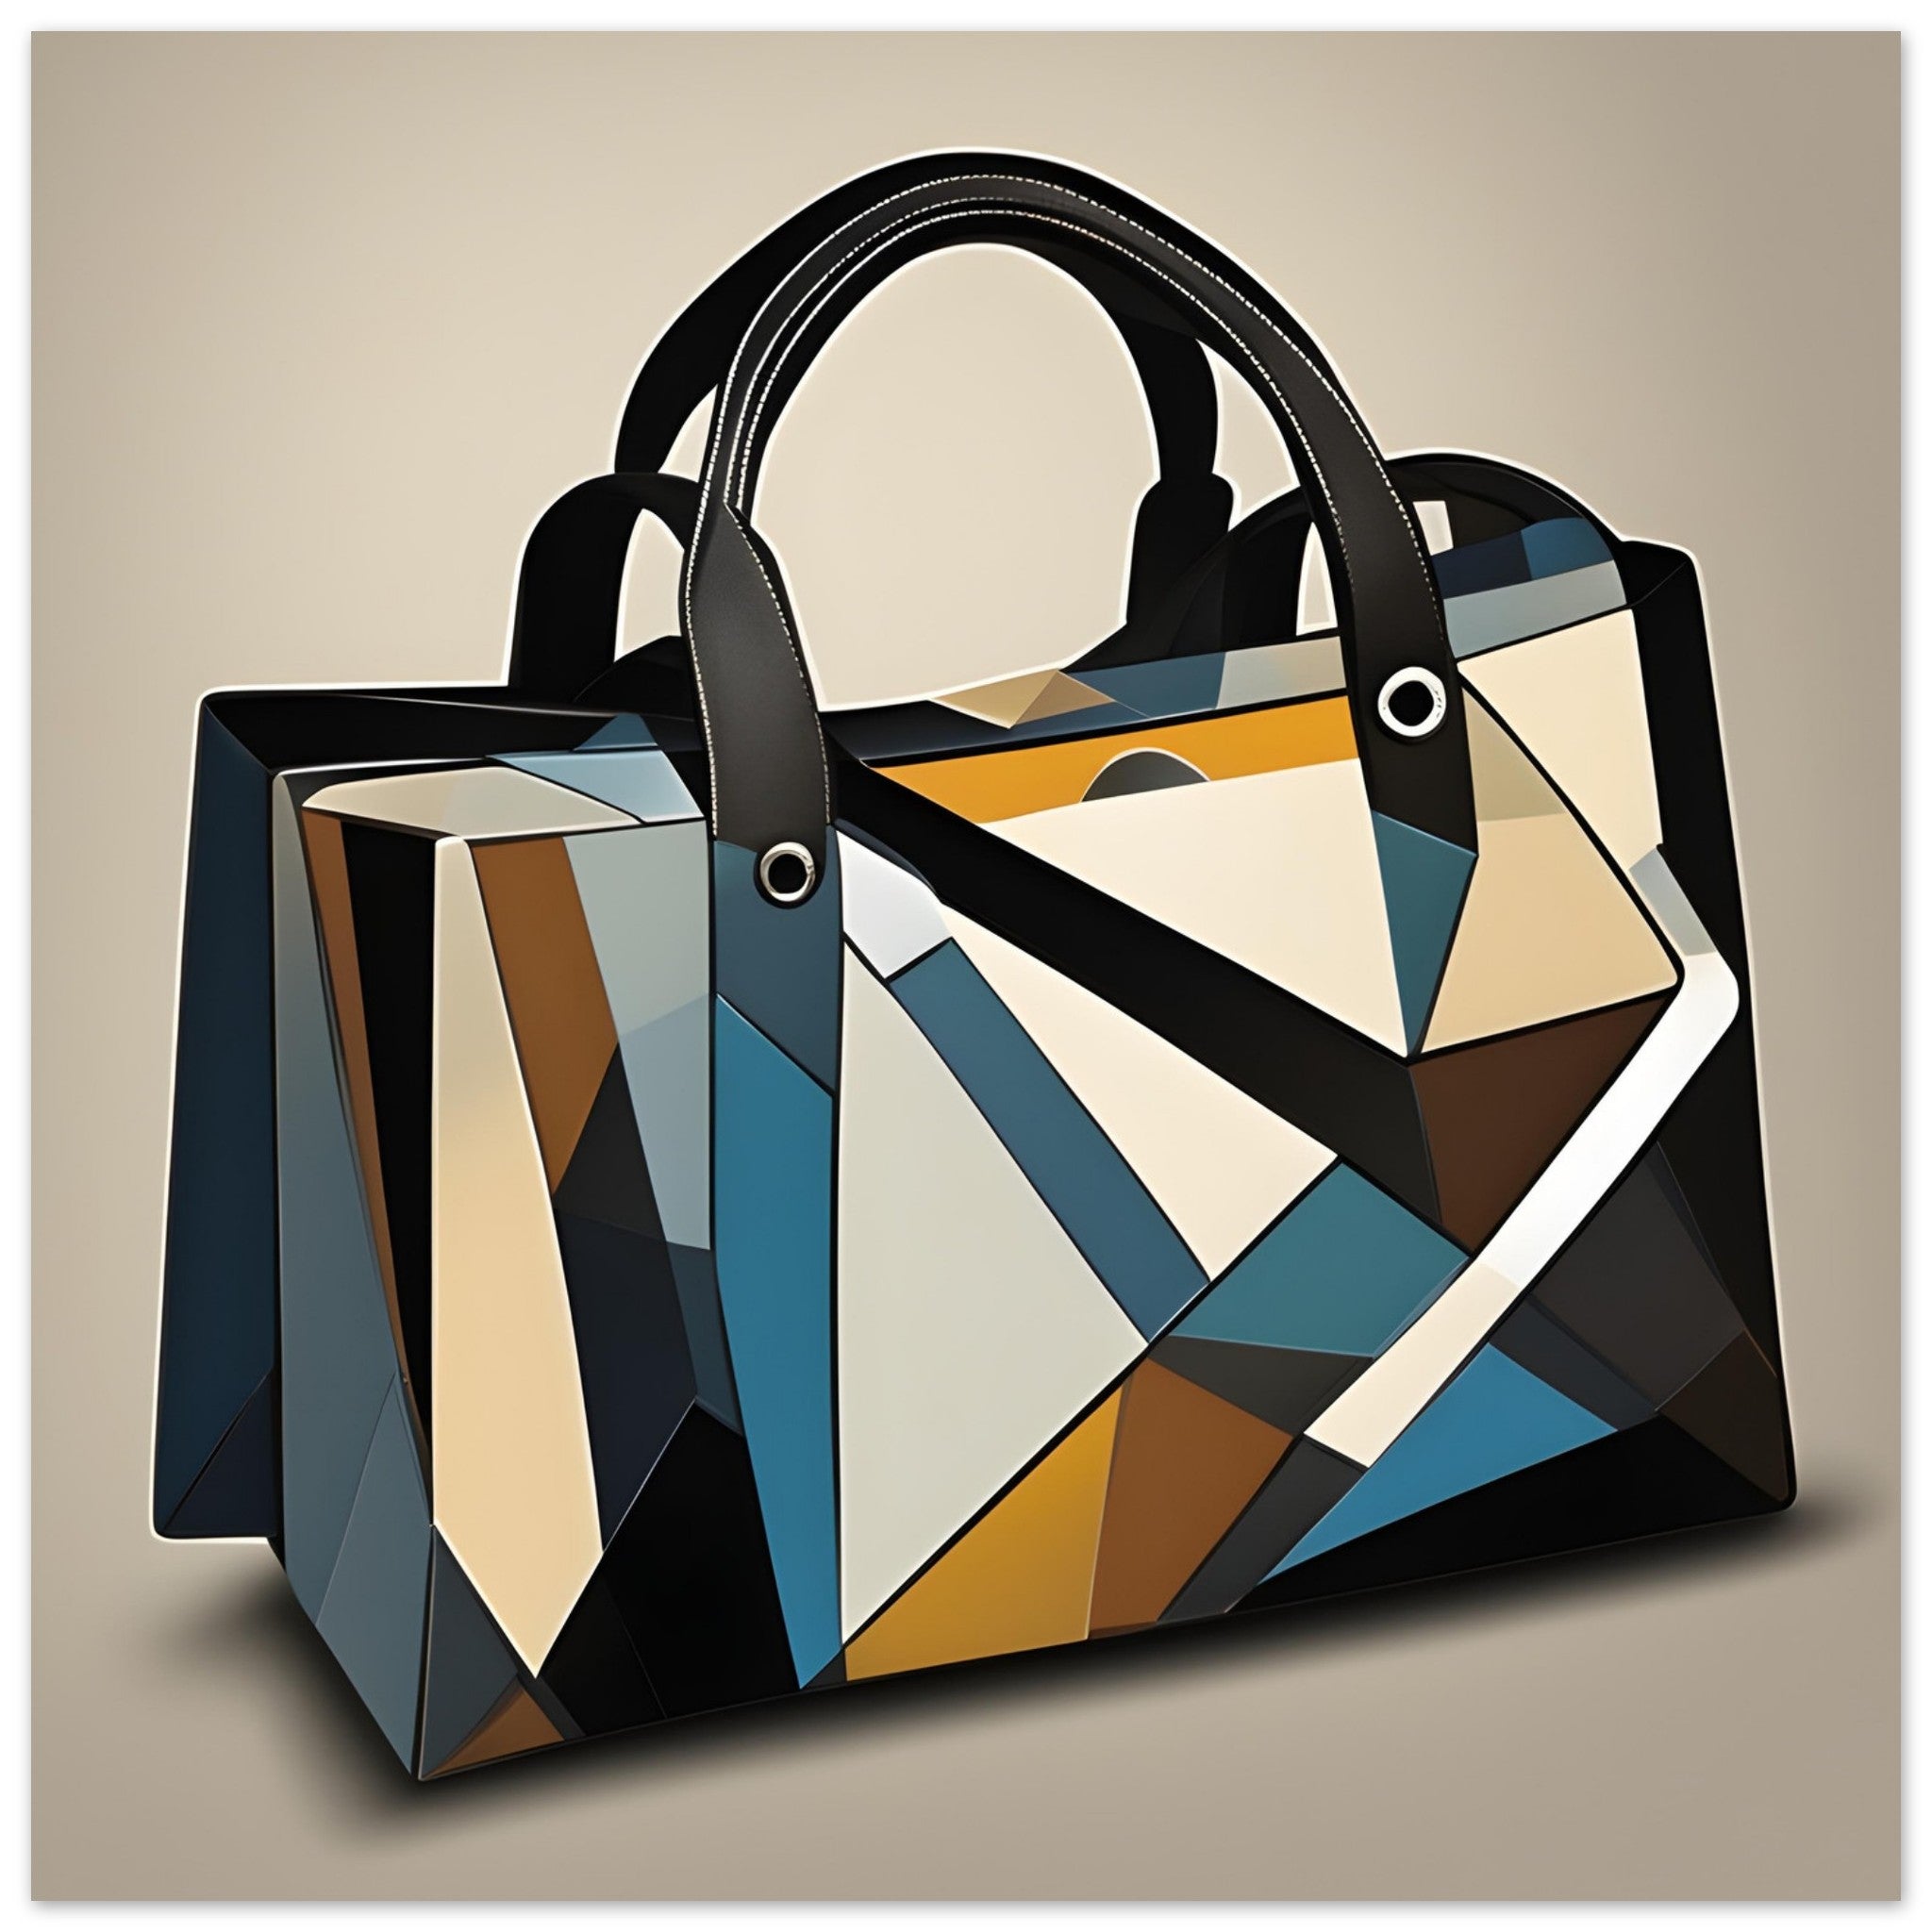 Beautiful Handbag - Cubist Wall Art, Unique Home Decor, Reflectapix, Picasso Style, Collectable Show Stopper, Kitchen Art, Centrepiece Gift